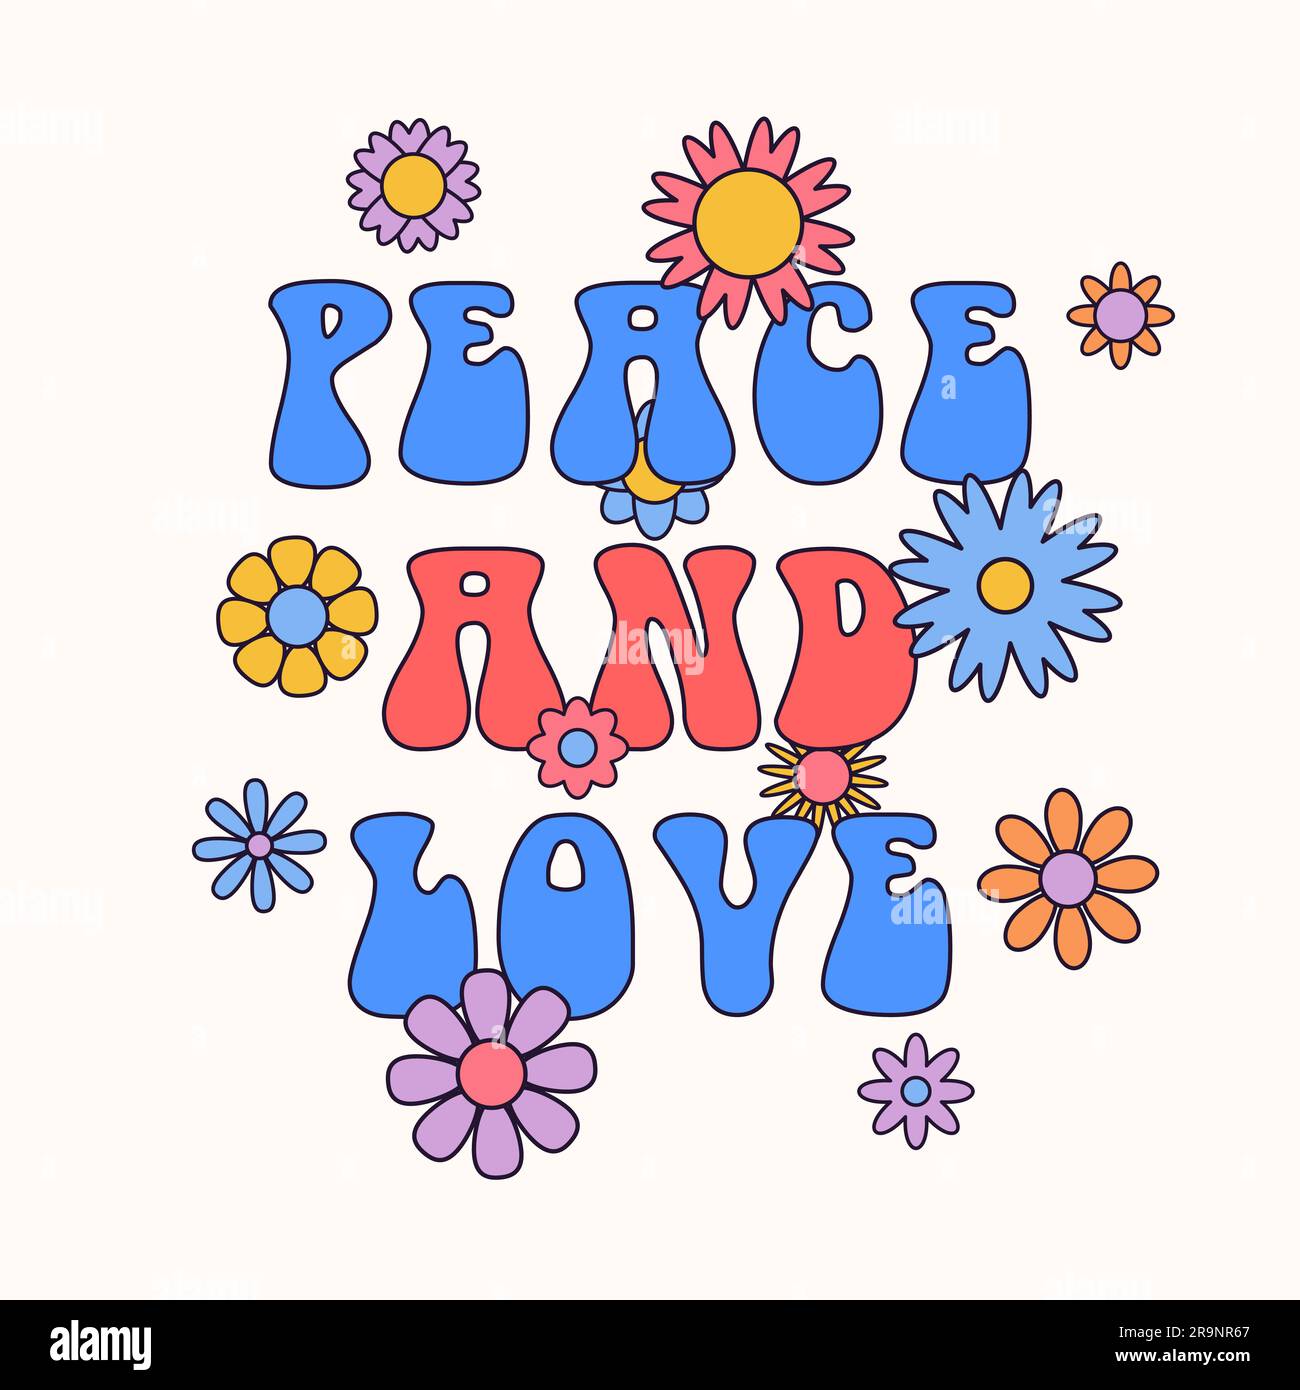 Vector trendy funny abstract retro 60s, 70s hippie groovy illustration Peace and Love with flowers for fashion art print, poster or card Stock Vector